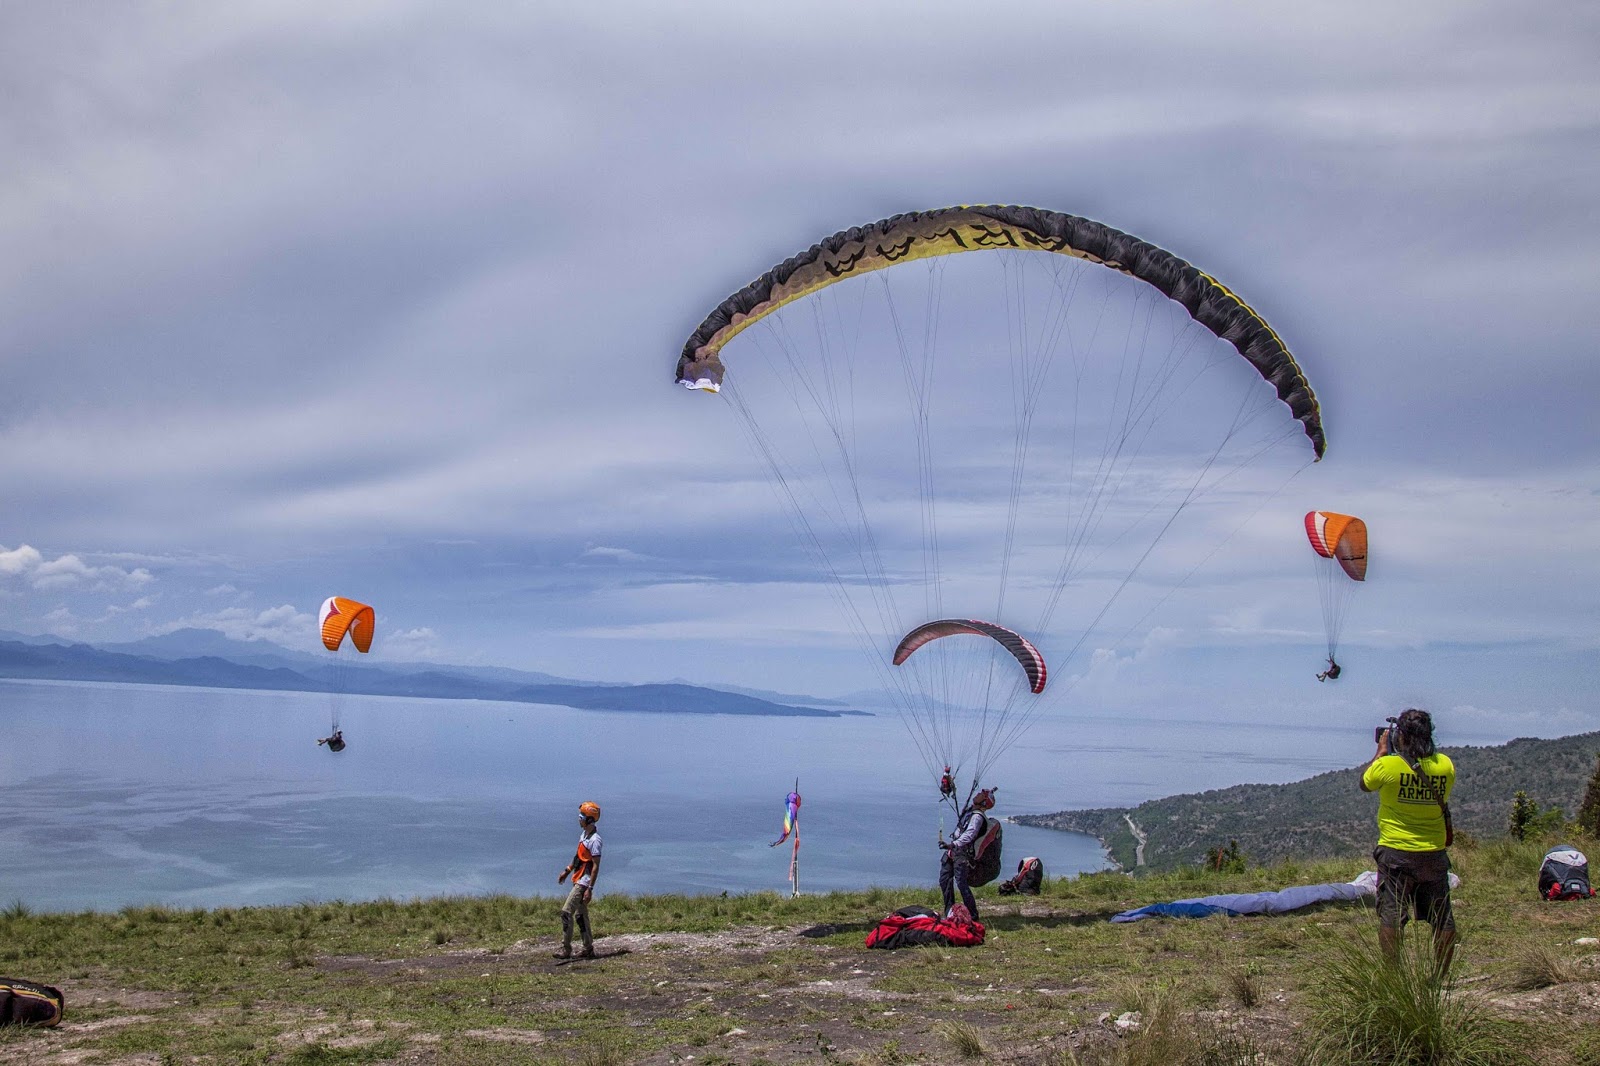 Paragliding – one of the things in Bucket list